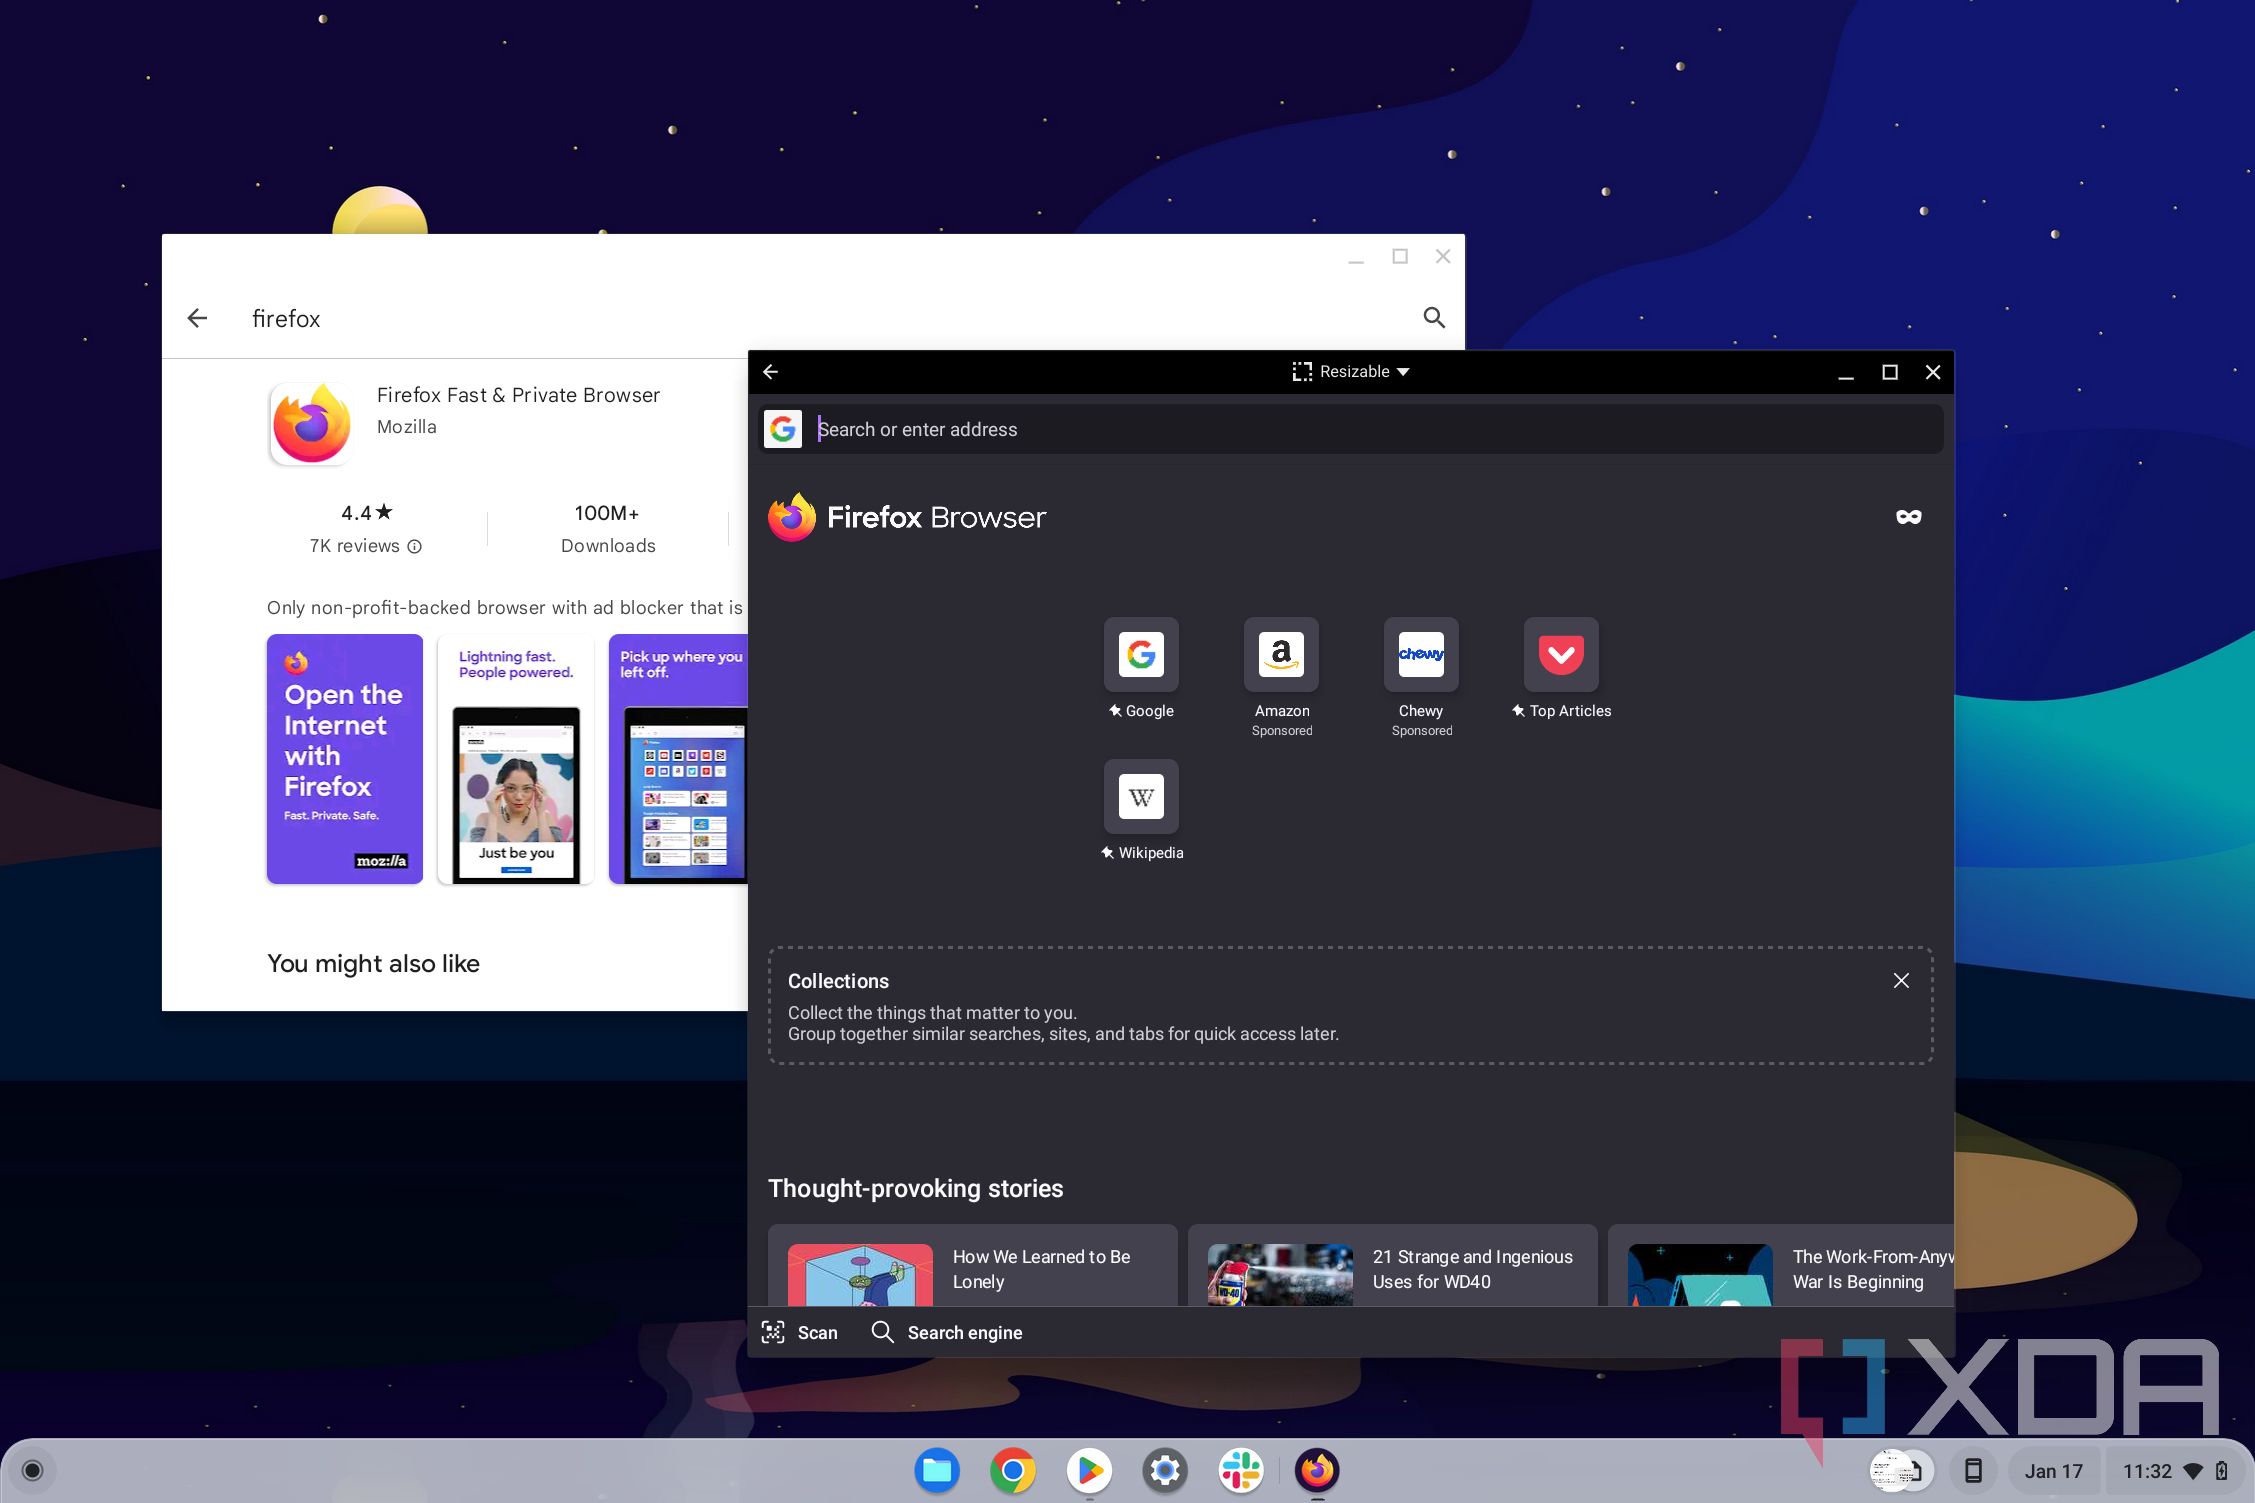 The Firefox Android app running on a Chromebook